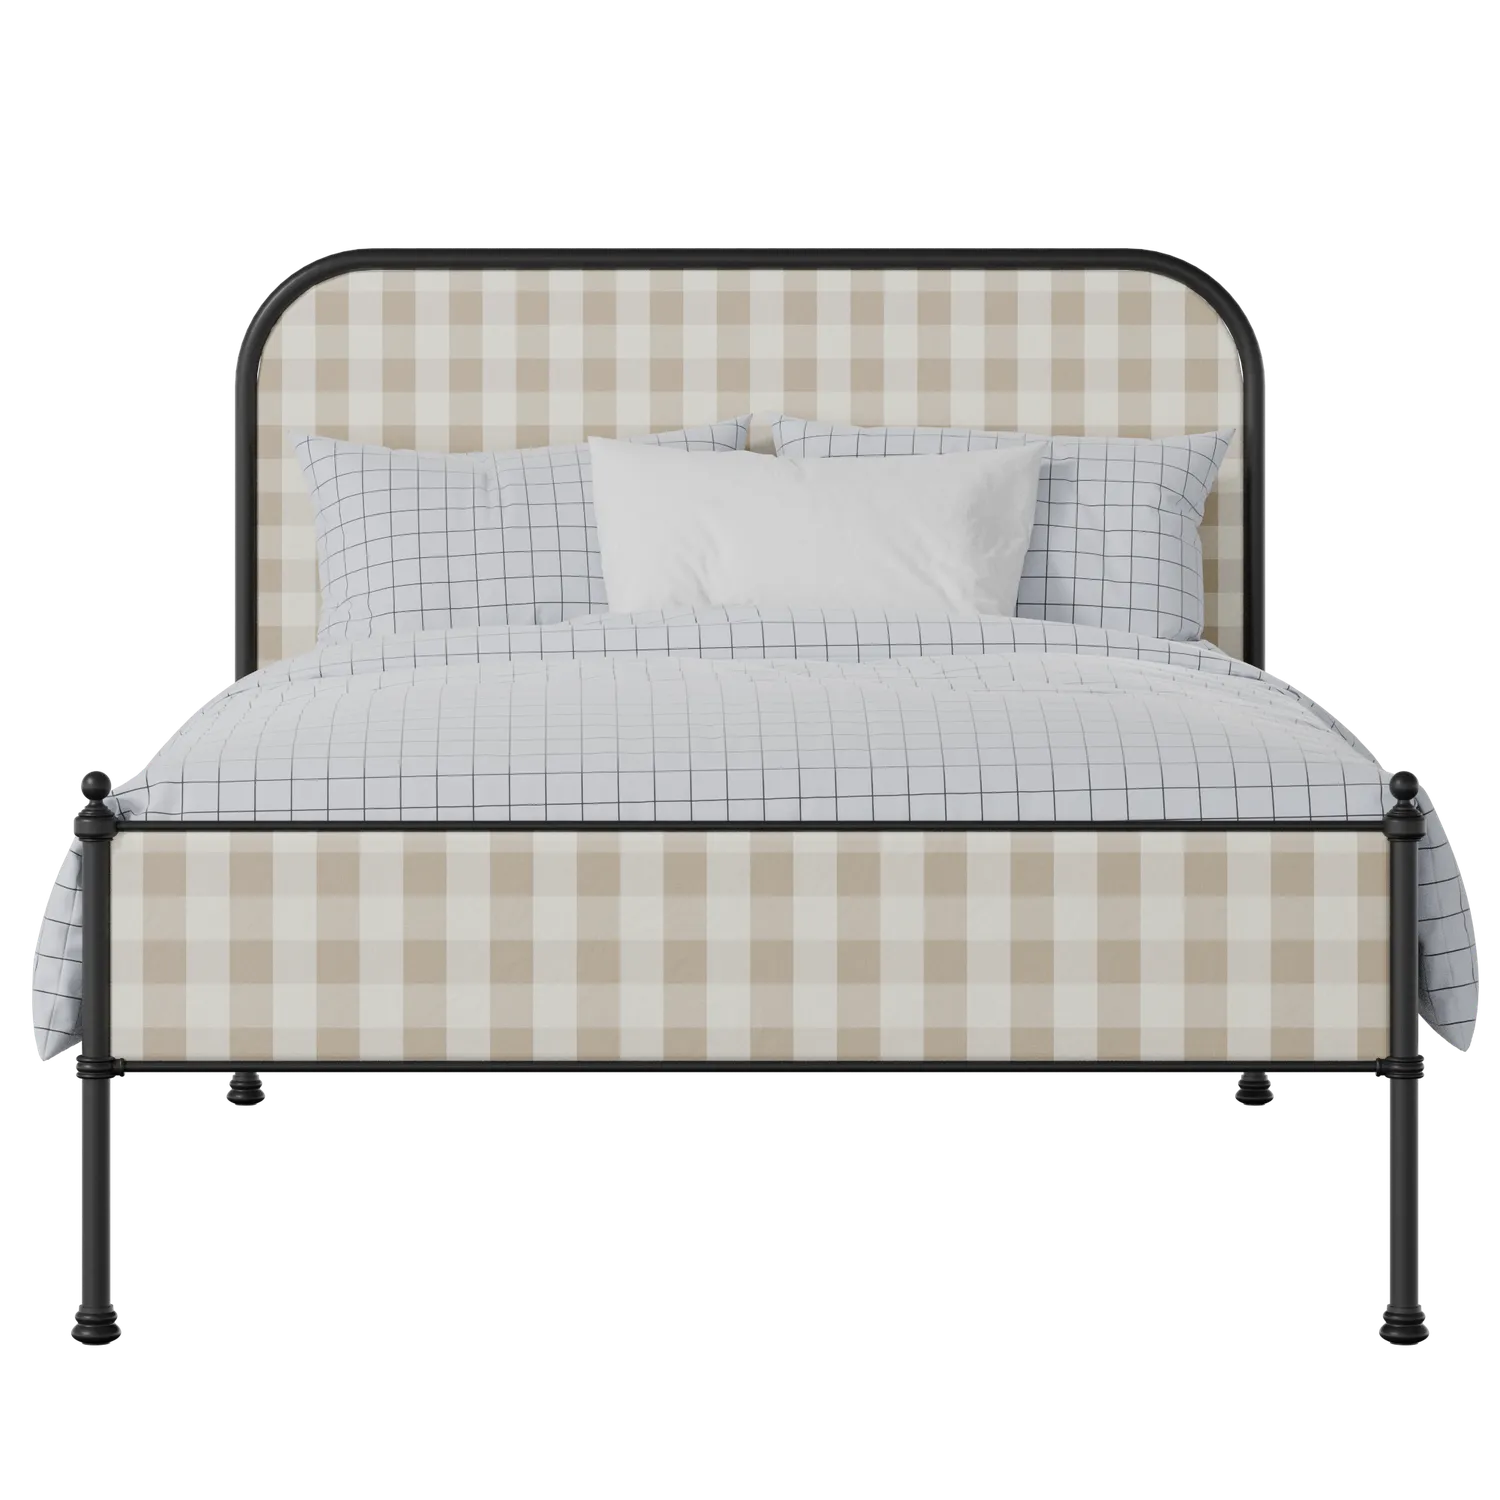 Bray Slim iron/metal upholstered bed in black with Romo Kemble Putty fabric